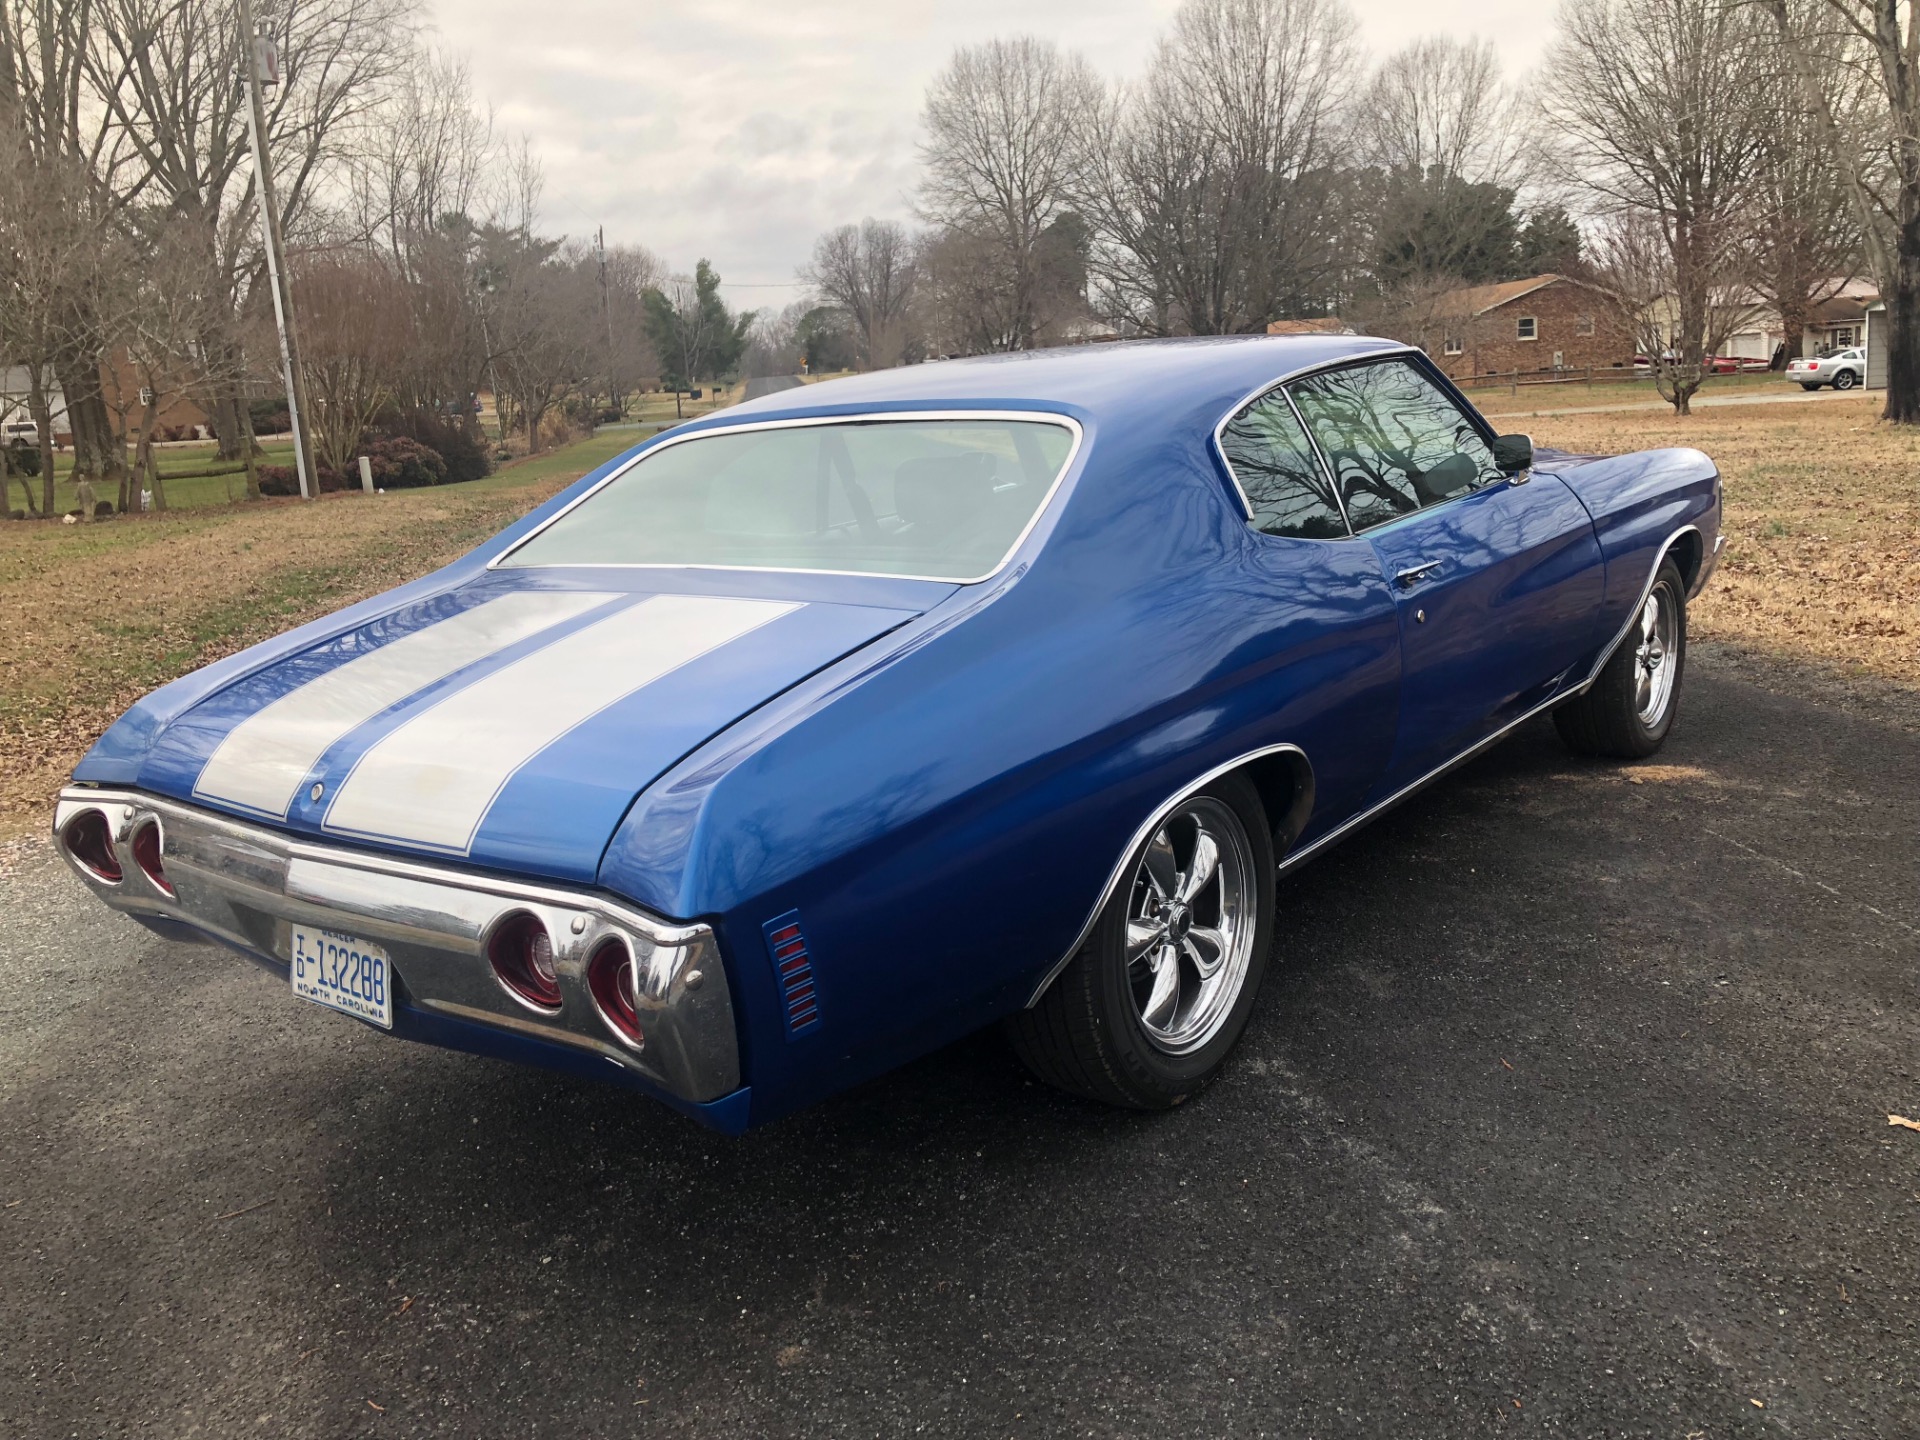 Used 1972 Chevrolet Chevelle -FRAME OFF RESTORED 2017-SS GAUGES-AIR CONDITIONING-SOLID MUSCLE CAR-VIDEO | Mundelein, IL